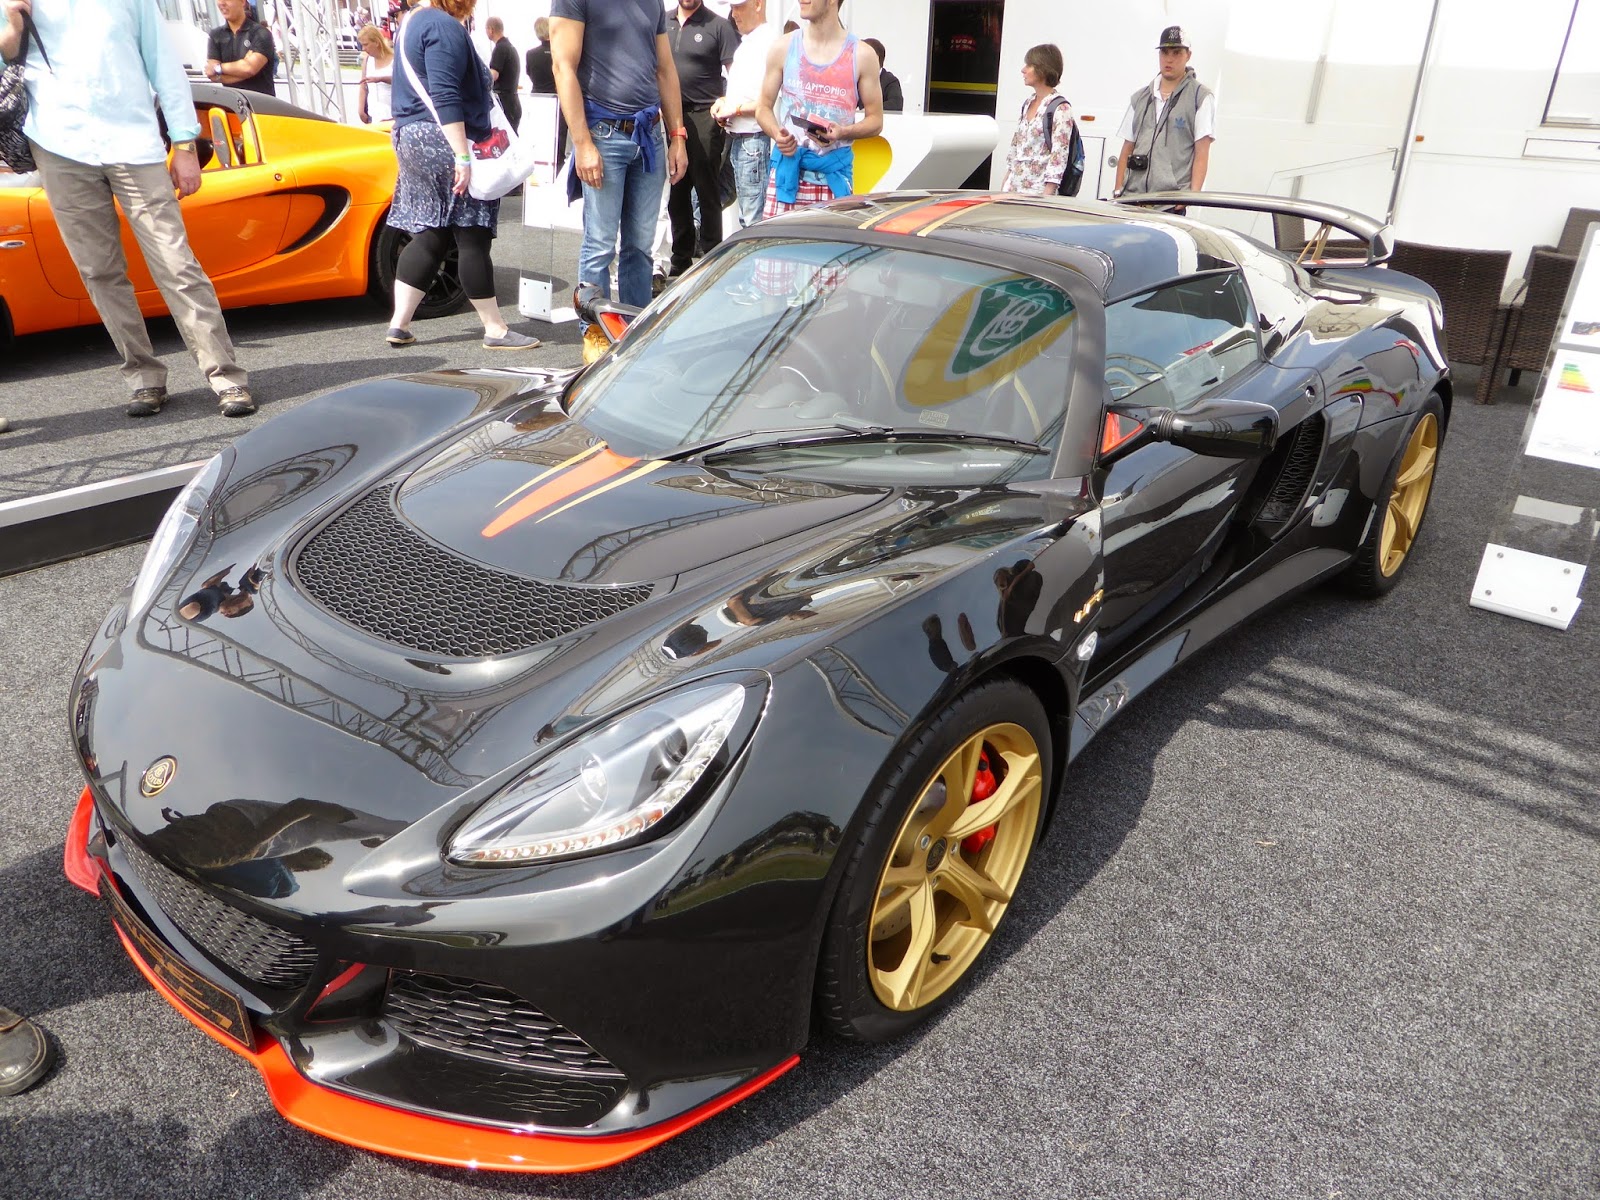 The Lotus LF1 is stunning and you'll find it on the main Lotus stand